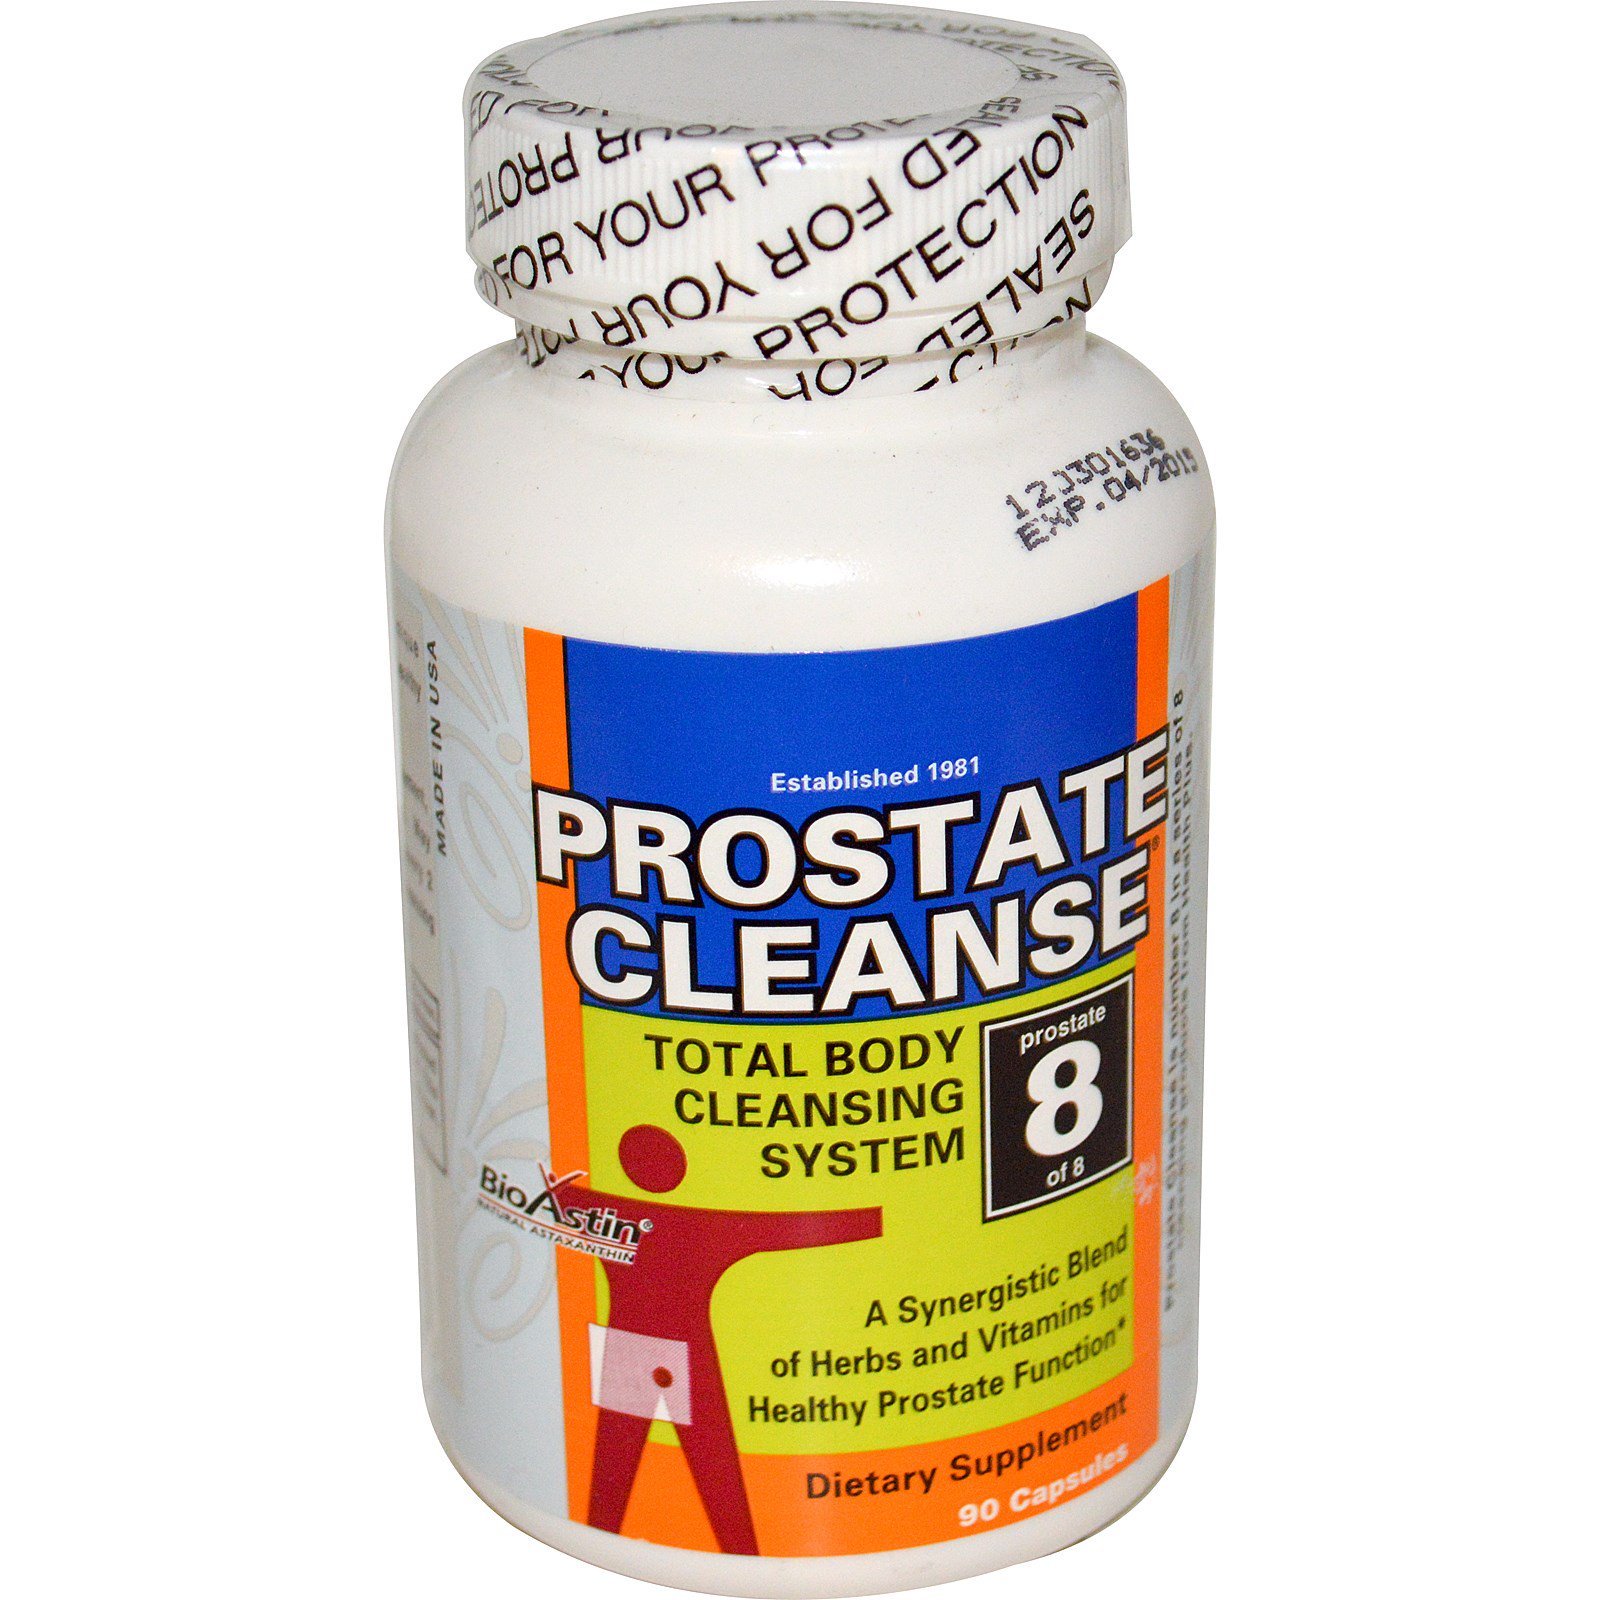 Health Plus, Prostate Cleanse, Total Body Cleansing System ...